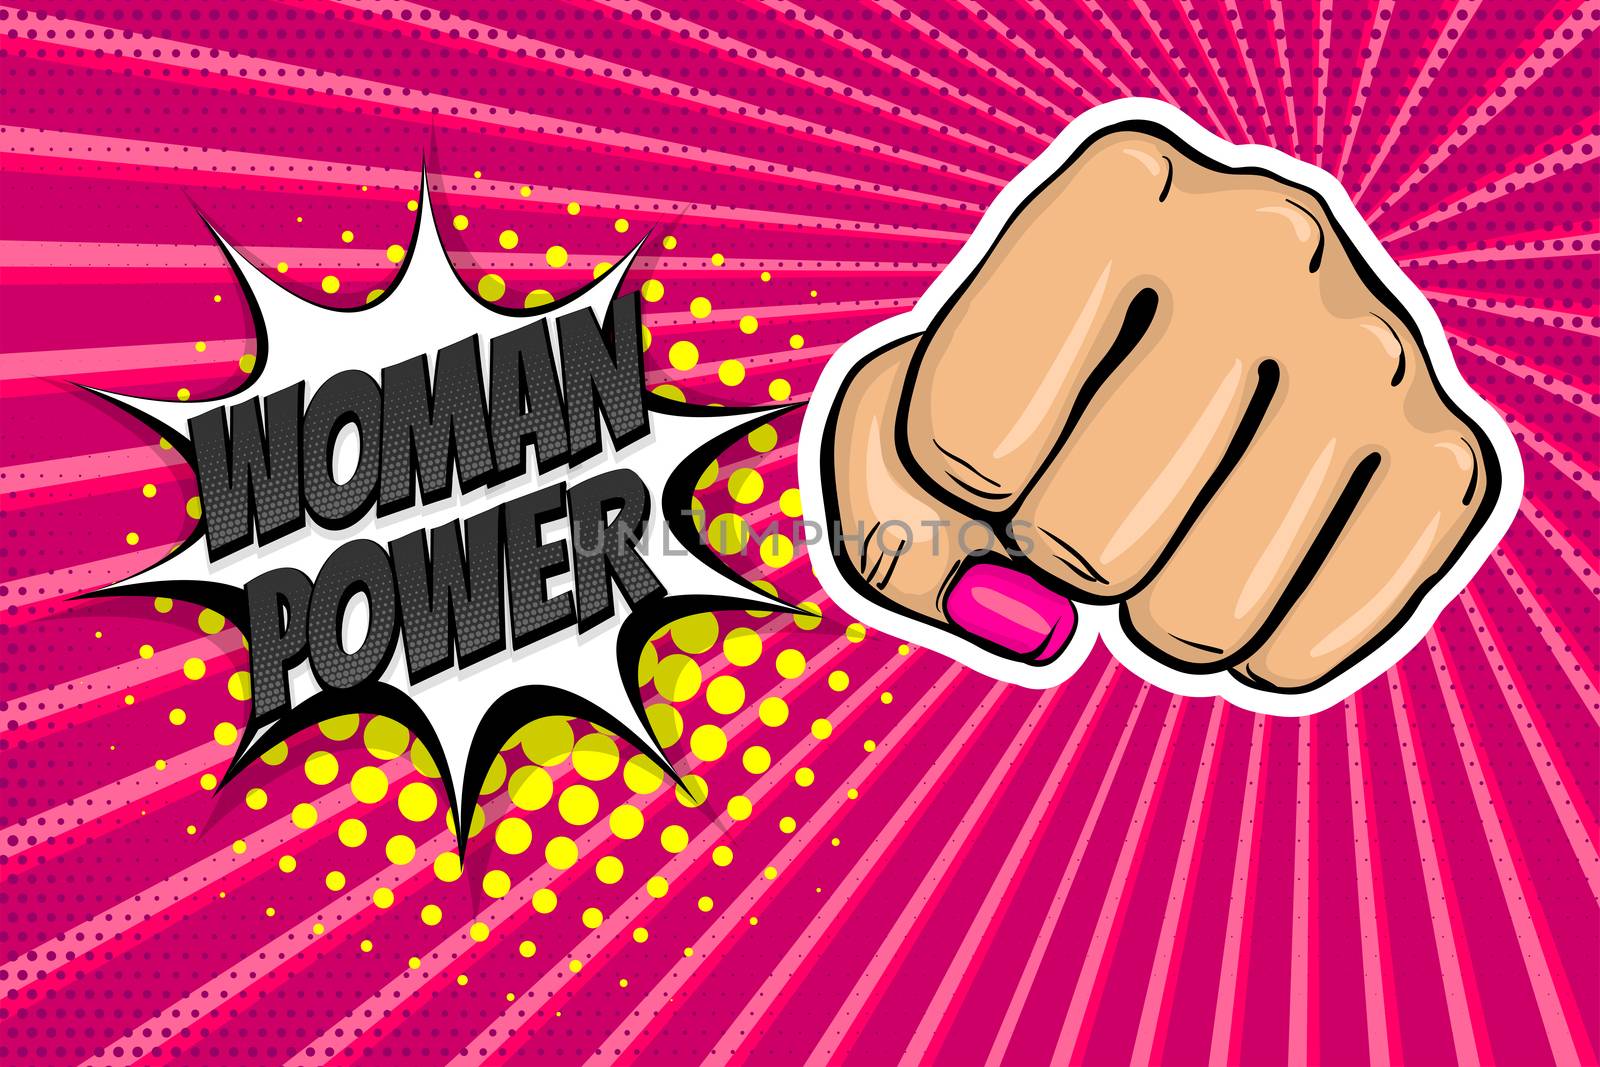 Woman fist - Girl power strong vector illustration. Cartoon pop art style halftone background. Female rights industry. Feminism symbol design. Fight poster protest. Comic book text speech bubble.